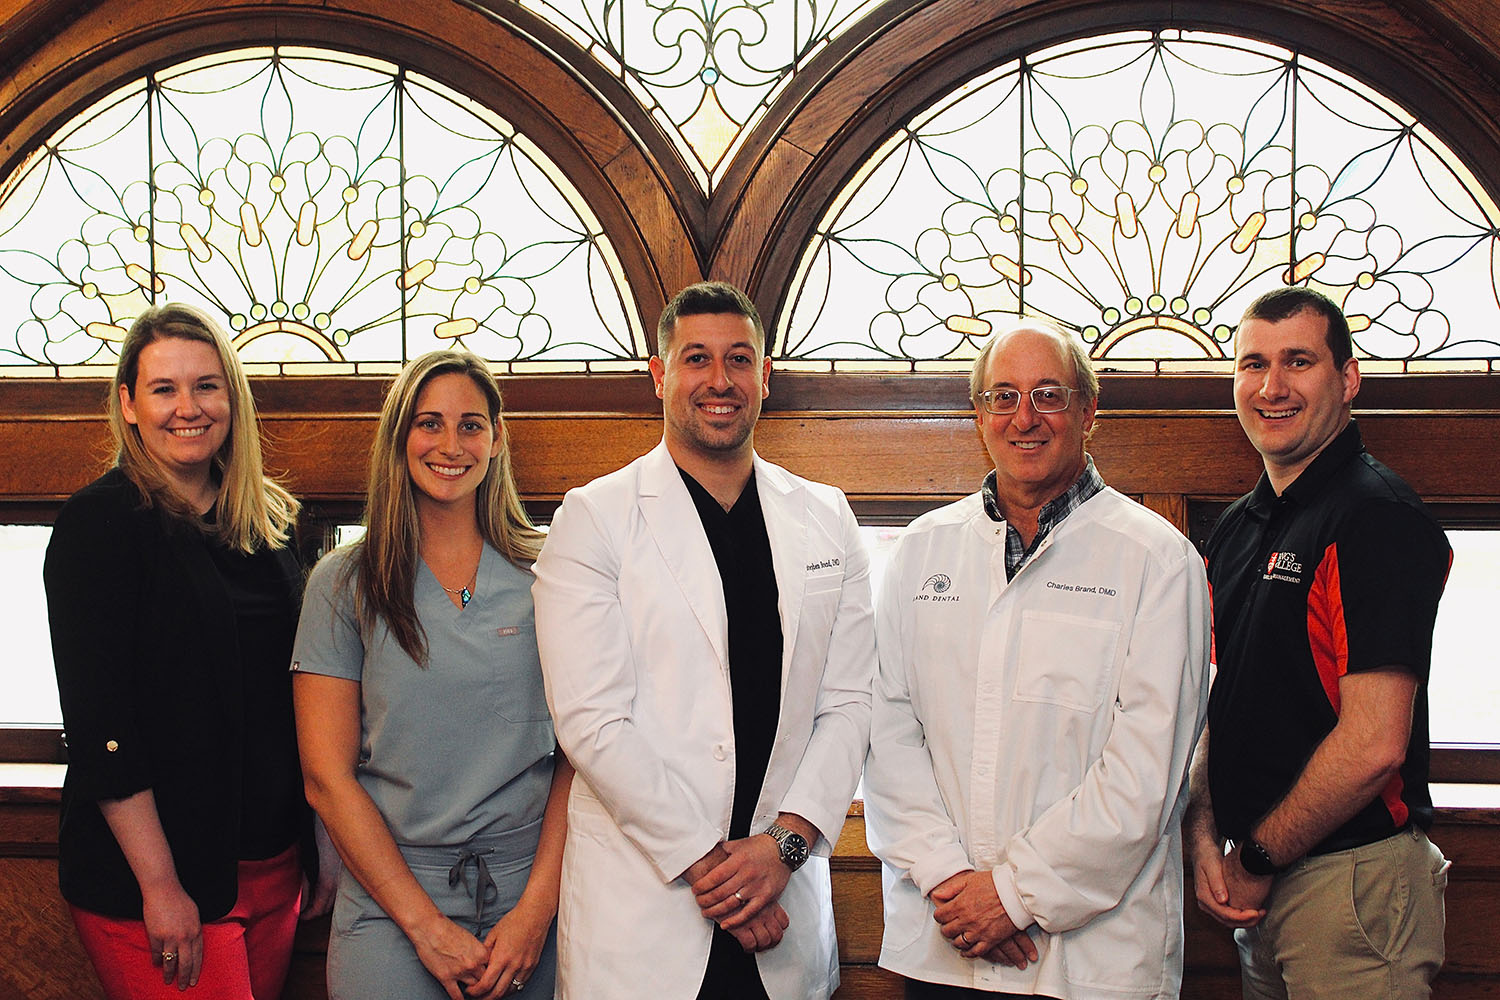 Dentists pose with King's College employees